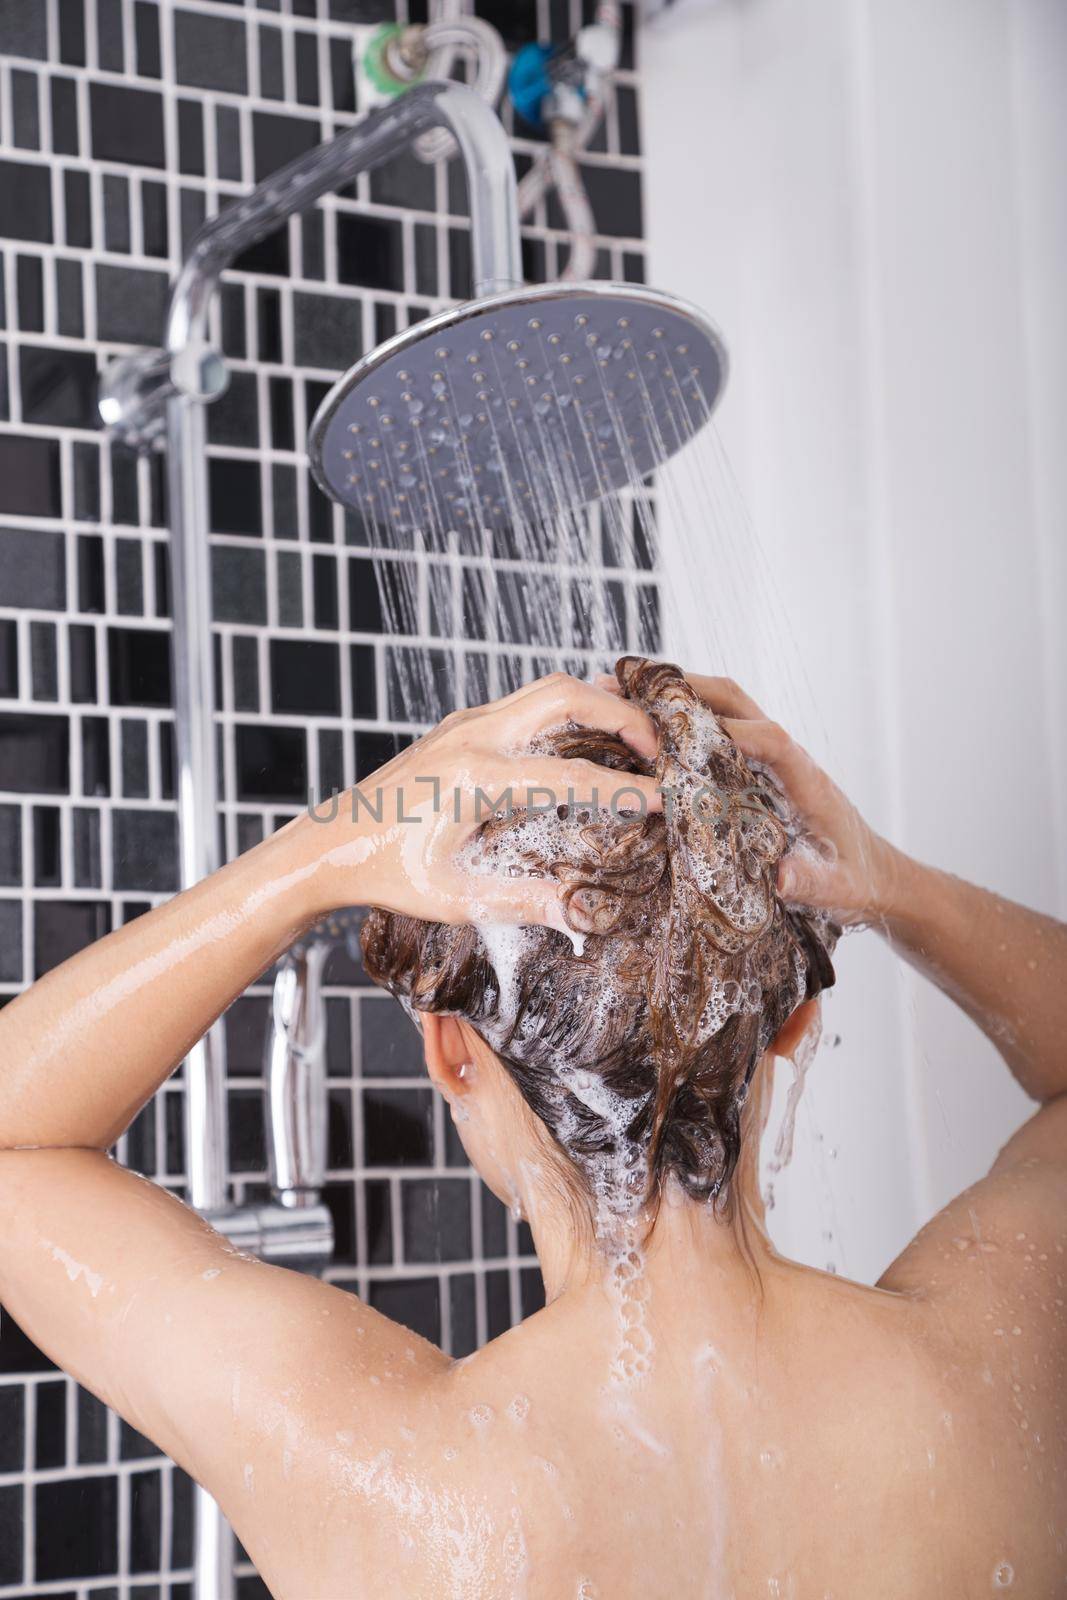 woman washing head and hair in the rain shower by shampoo, rear view by geargodz